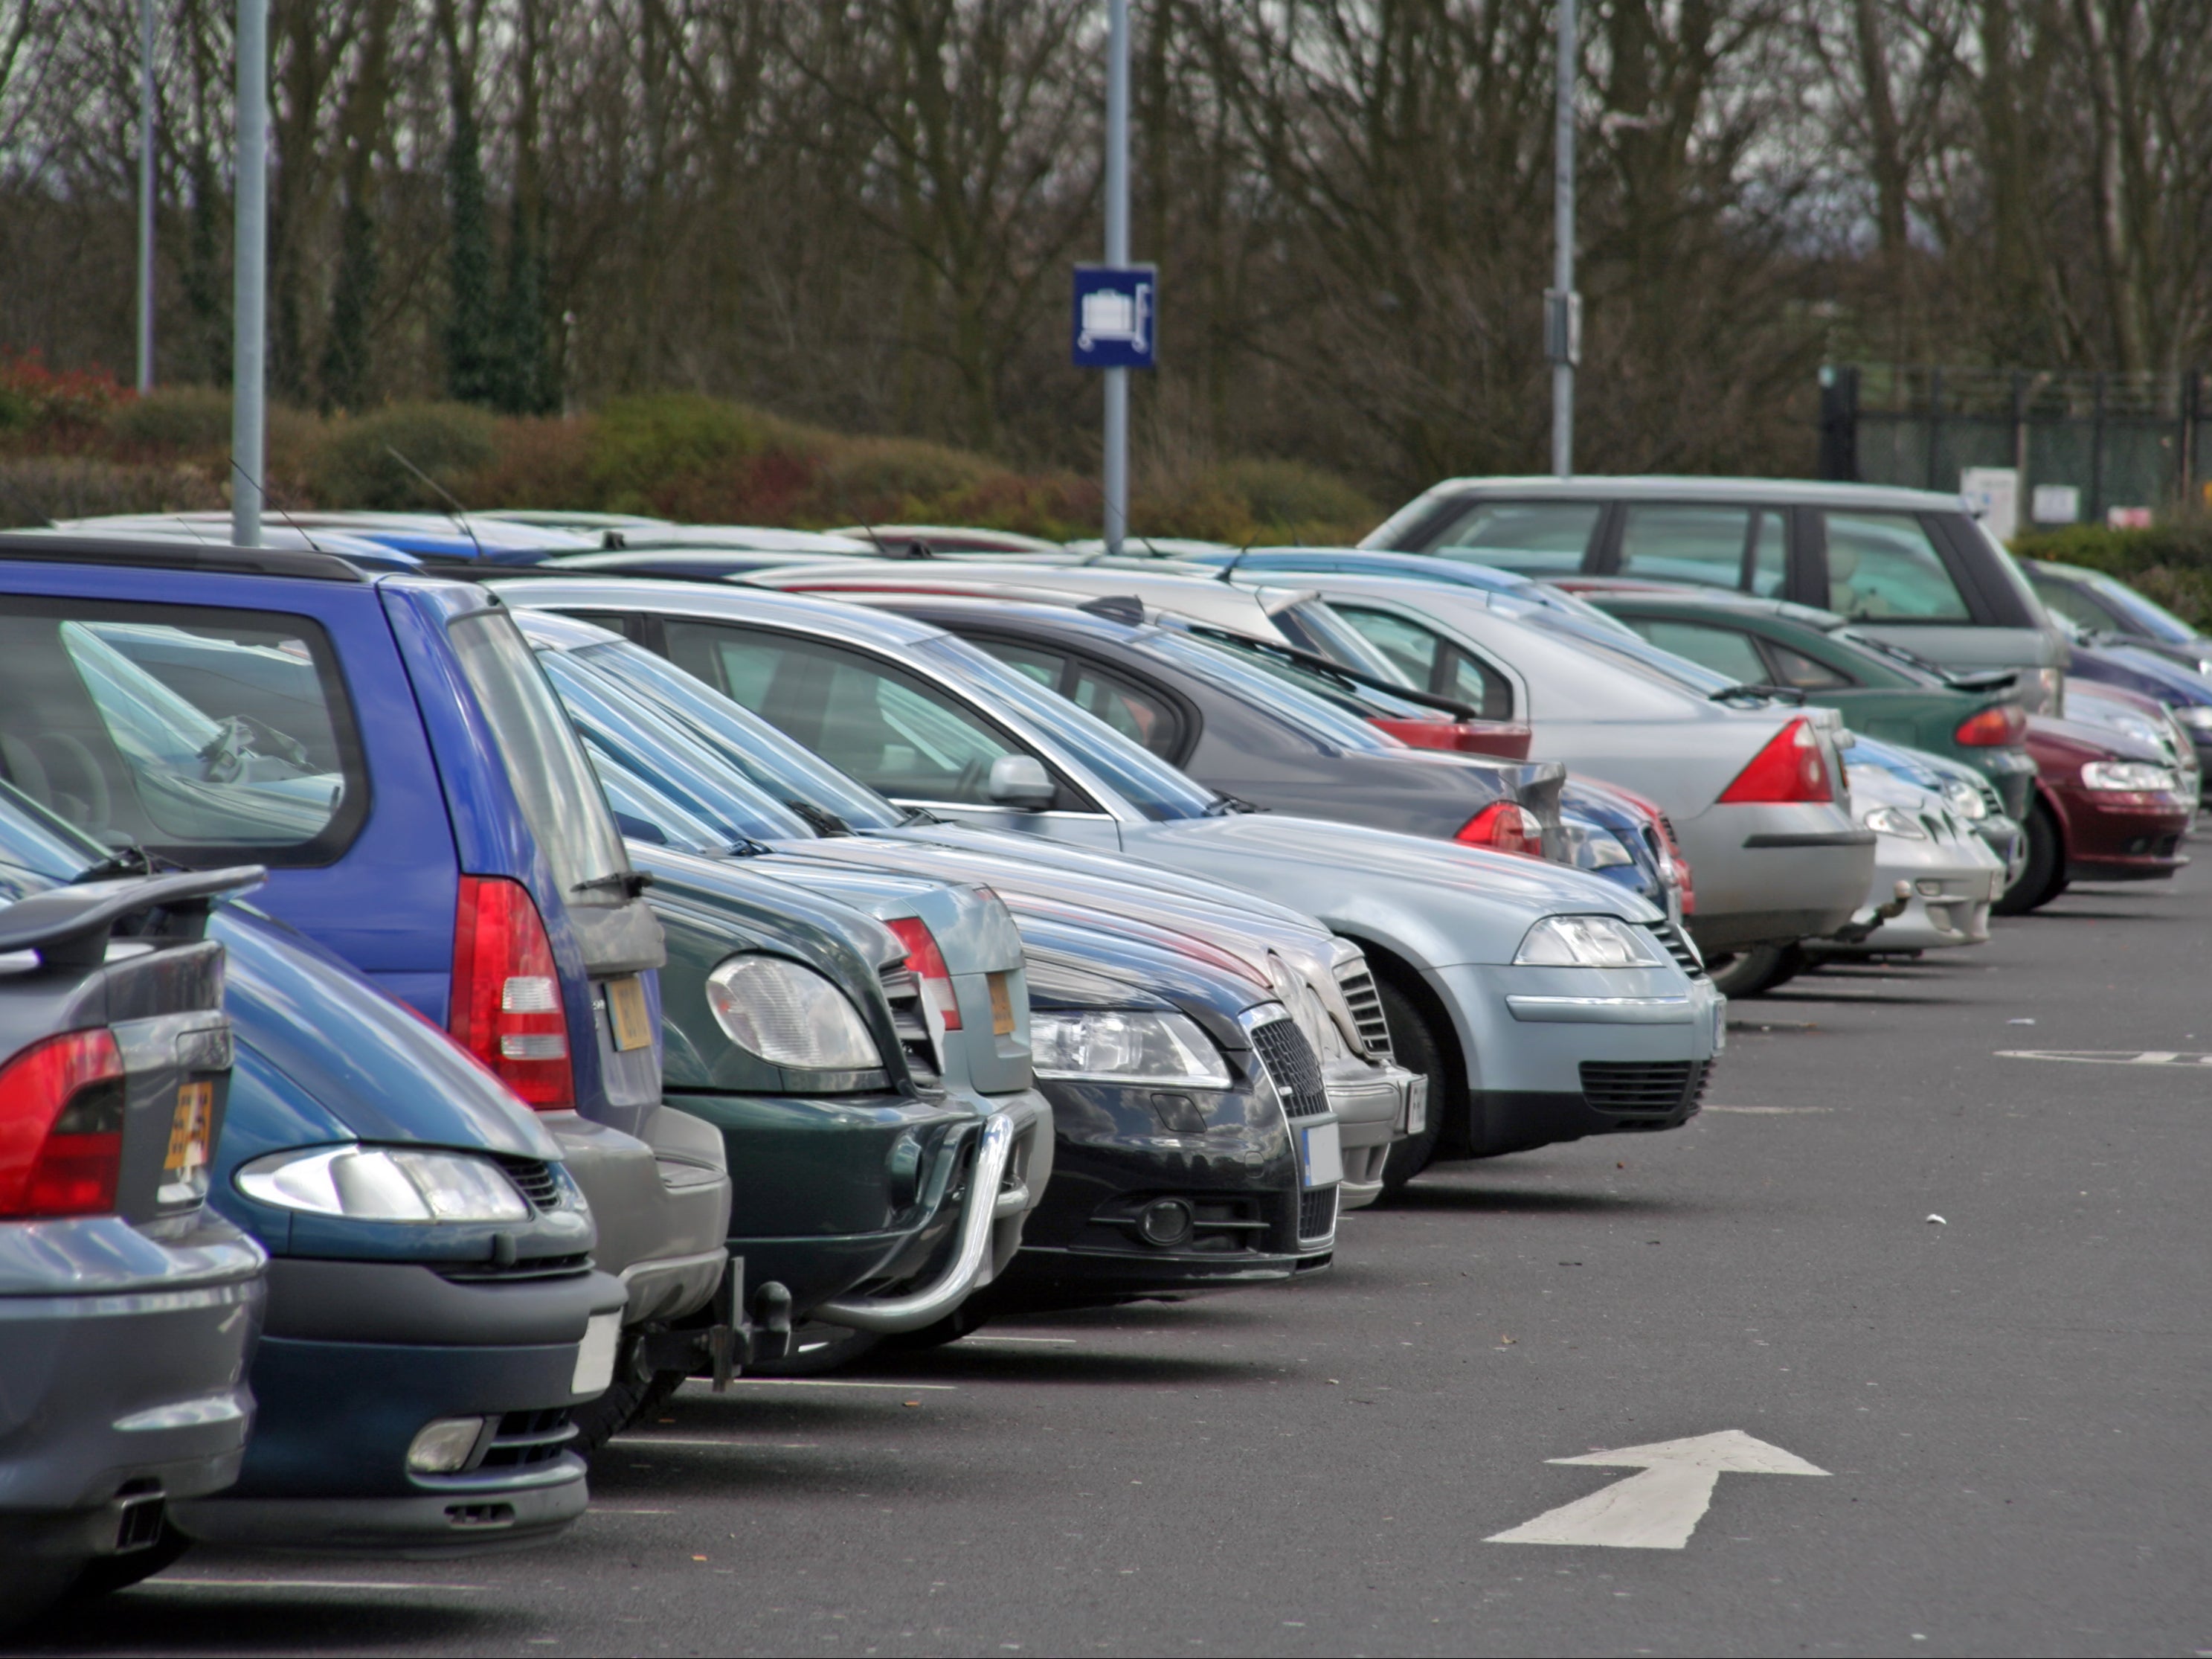 An average of 30,000 parking tickets are handed out by private firms on average a day